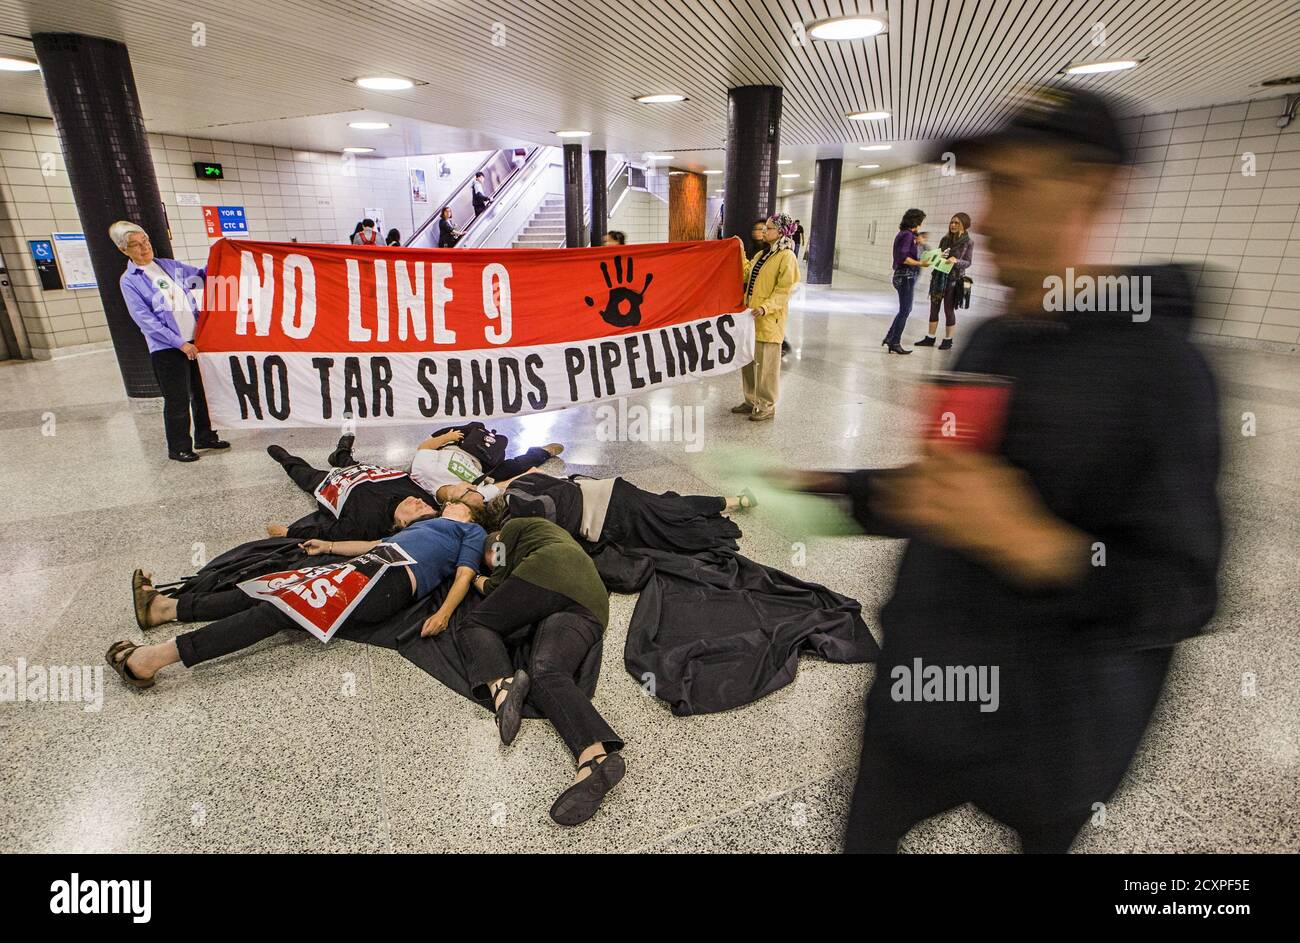 Protesters from the "The Toronto No Line 9 Network" perform a "die-in" to demonstrate what they say are the possible effects if the Enbridge operated "Line 9" petroleum pipeline, which runs under the Finch subway station, ruptured, in Toronto, June 29, 2015. Enbridge has been seeking permission to reverse the flow of the pipeline that runs from southern Ontario to Montreal. The National Energy Board has ordered Enbridge to conduct hydrostatic testing before they can proceed with the plan, according to local media reports.  REUTERS/Mark Blinch Stock Photo